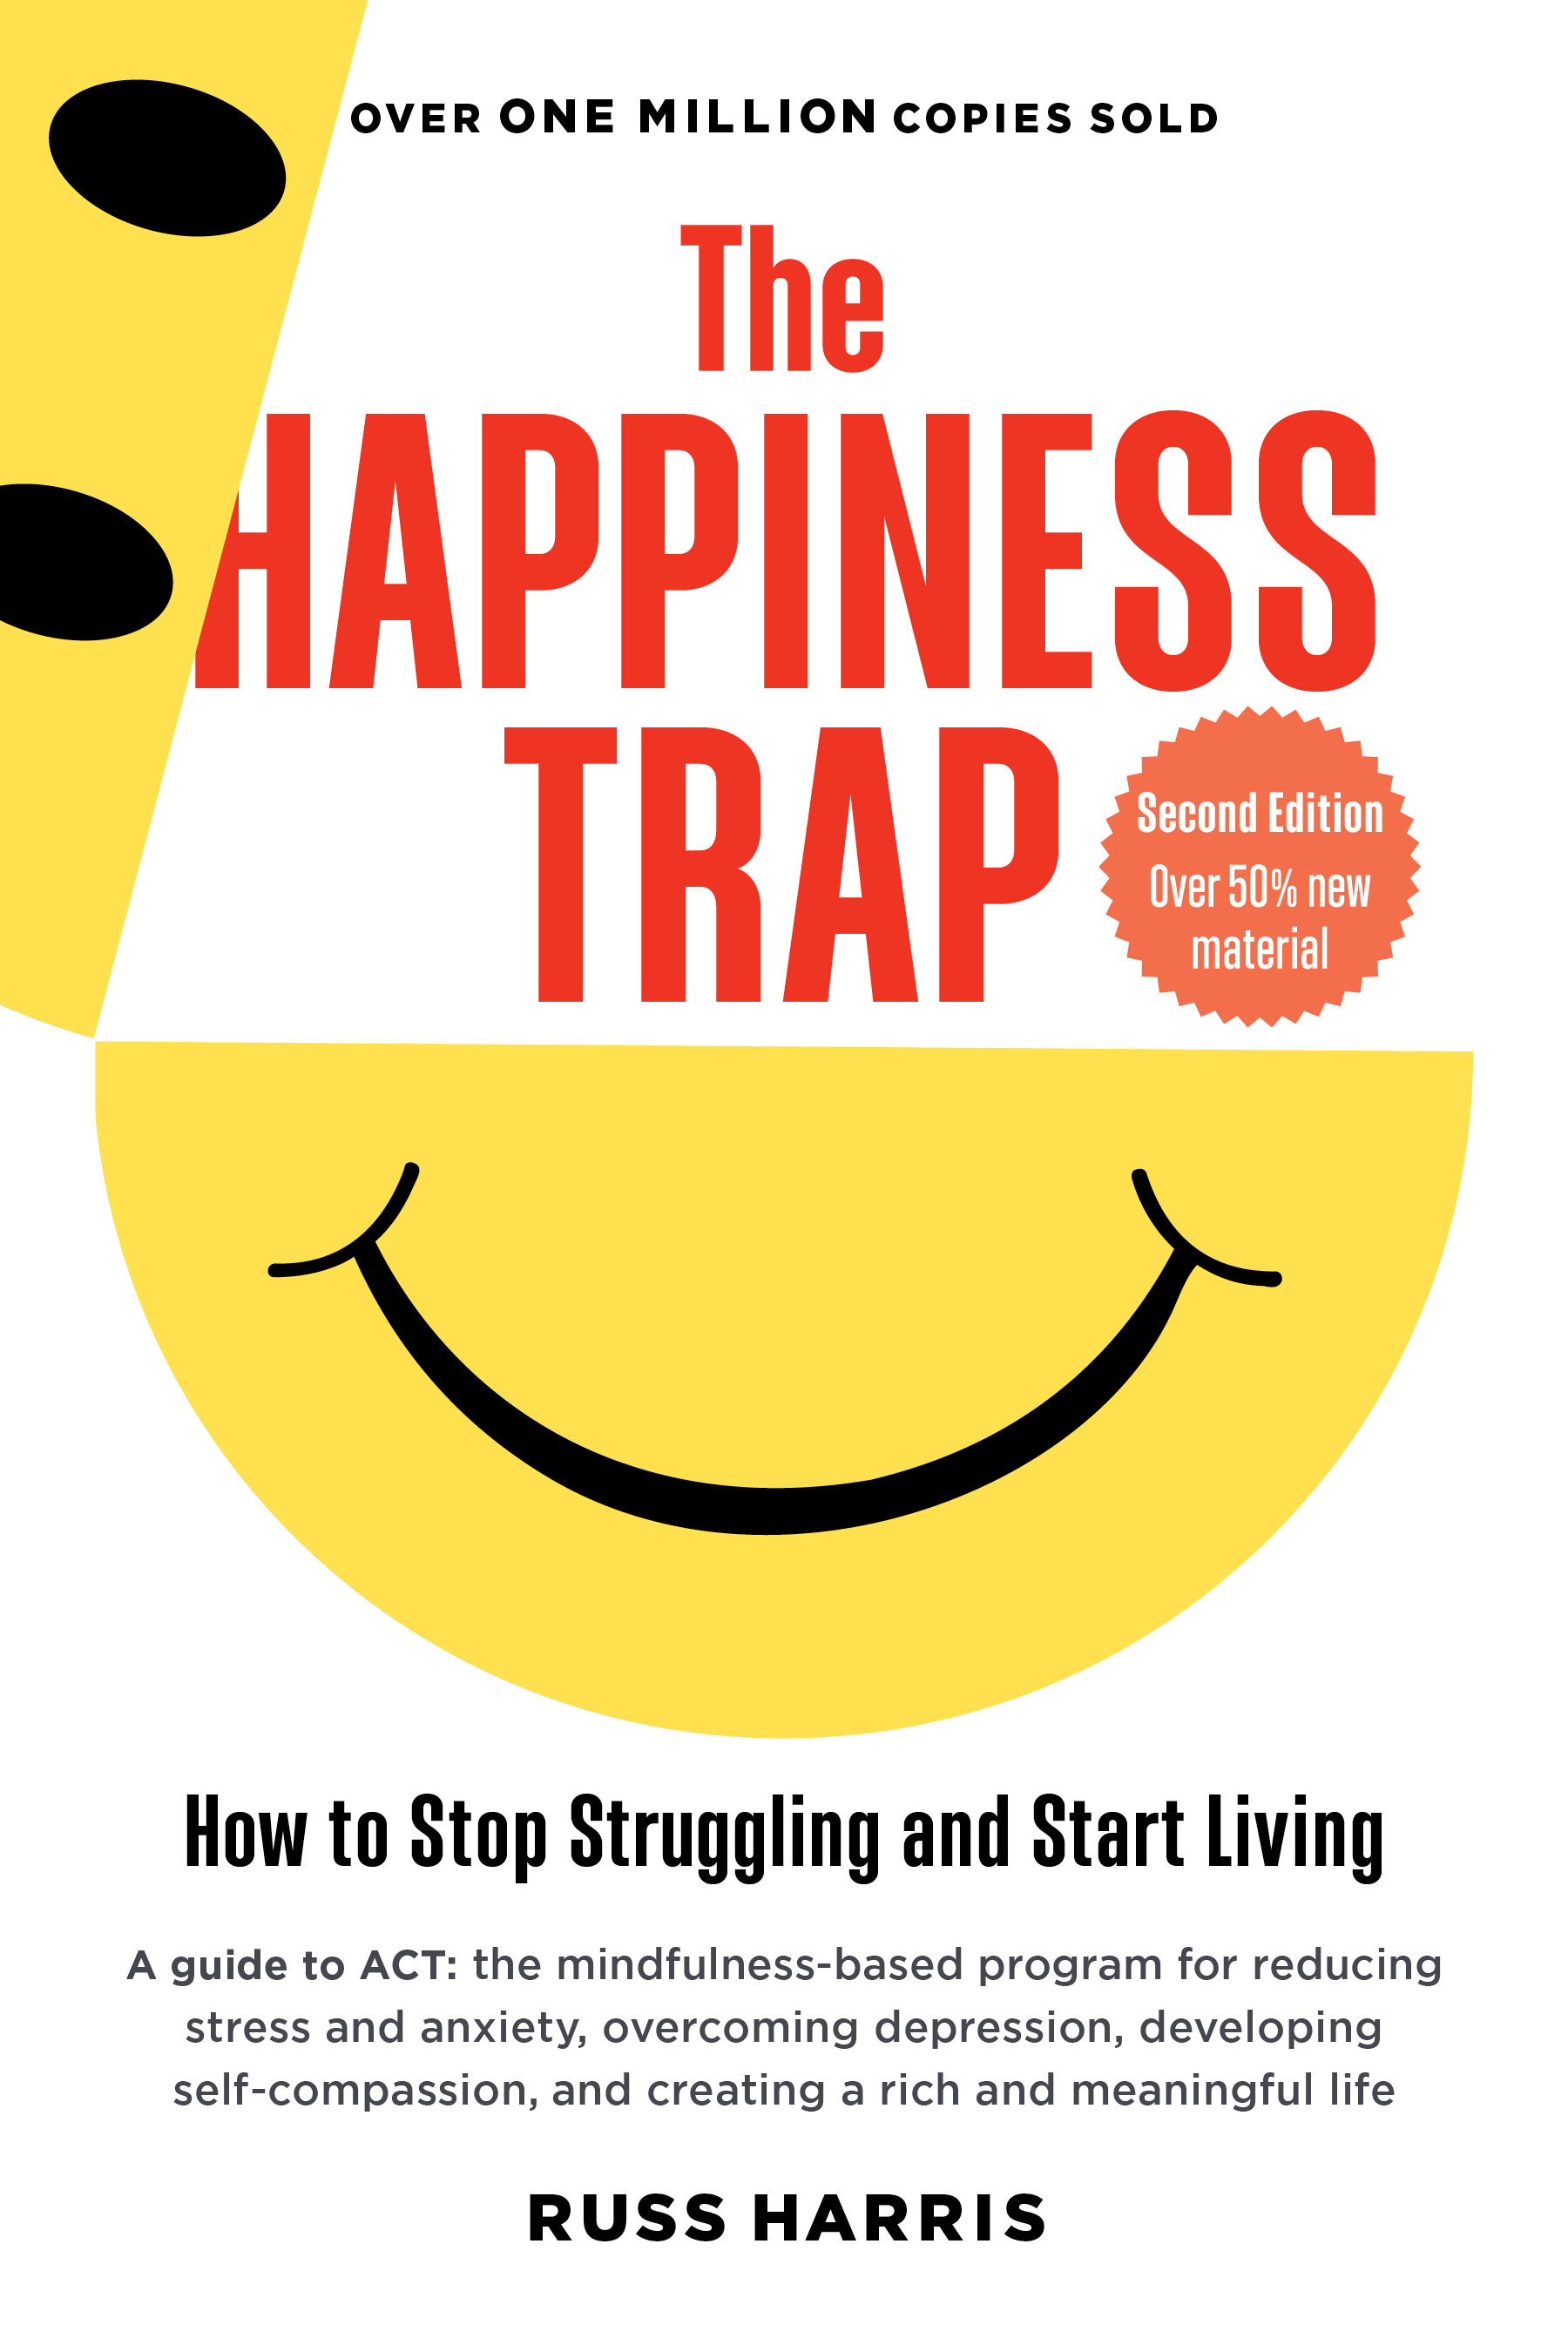 The Happiness Trap : How to Stop Struggling and Start Living (Second Edition) | Psychology & Self-Improvement